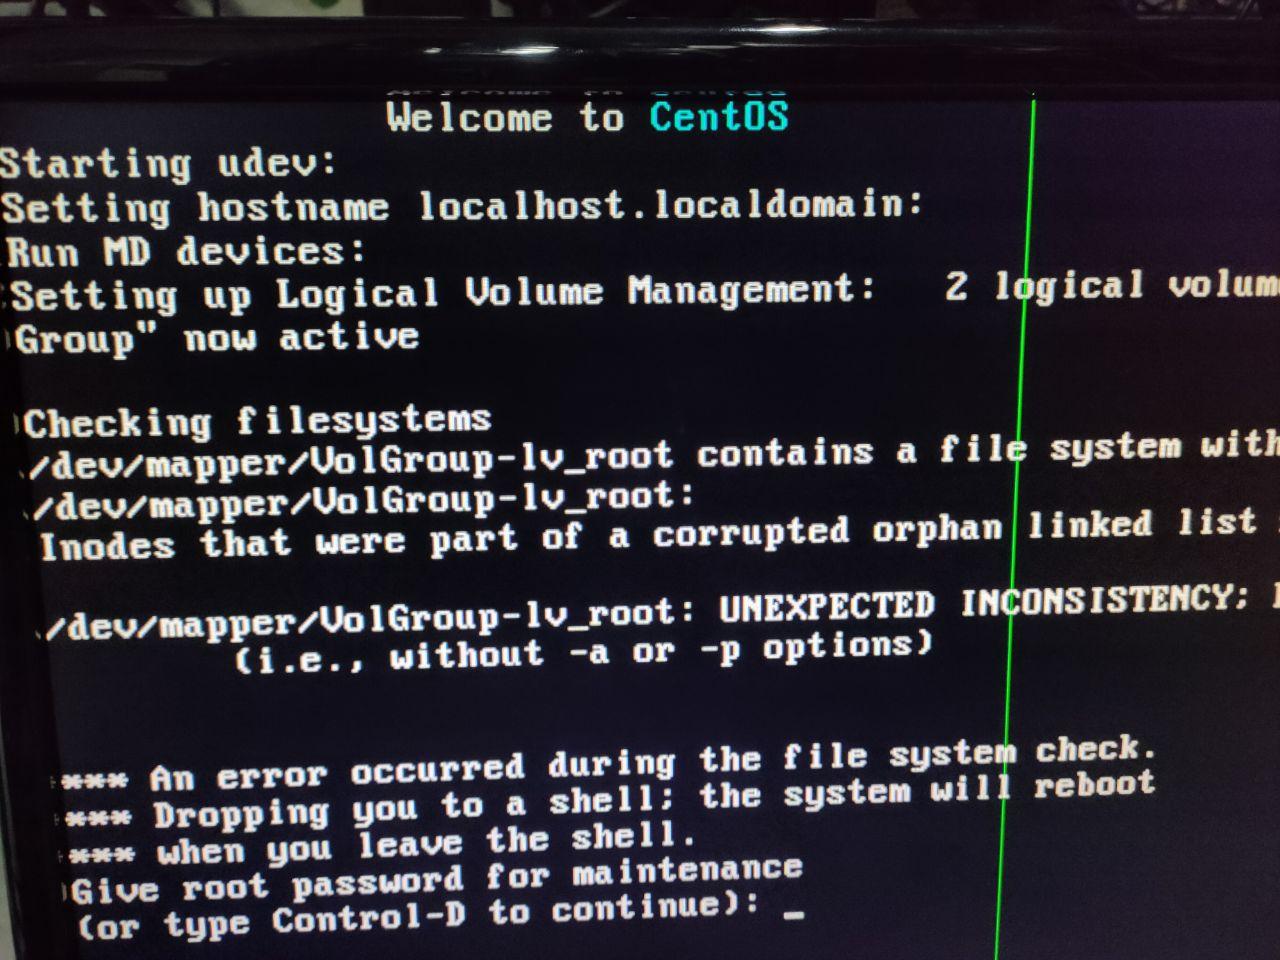 Solusi ” An error occurred during the file system check pada centos raid 0 “